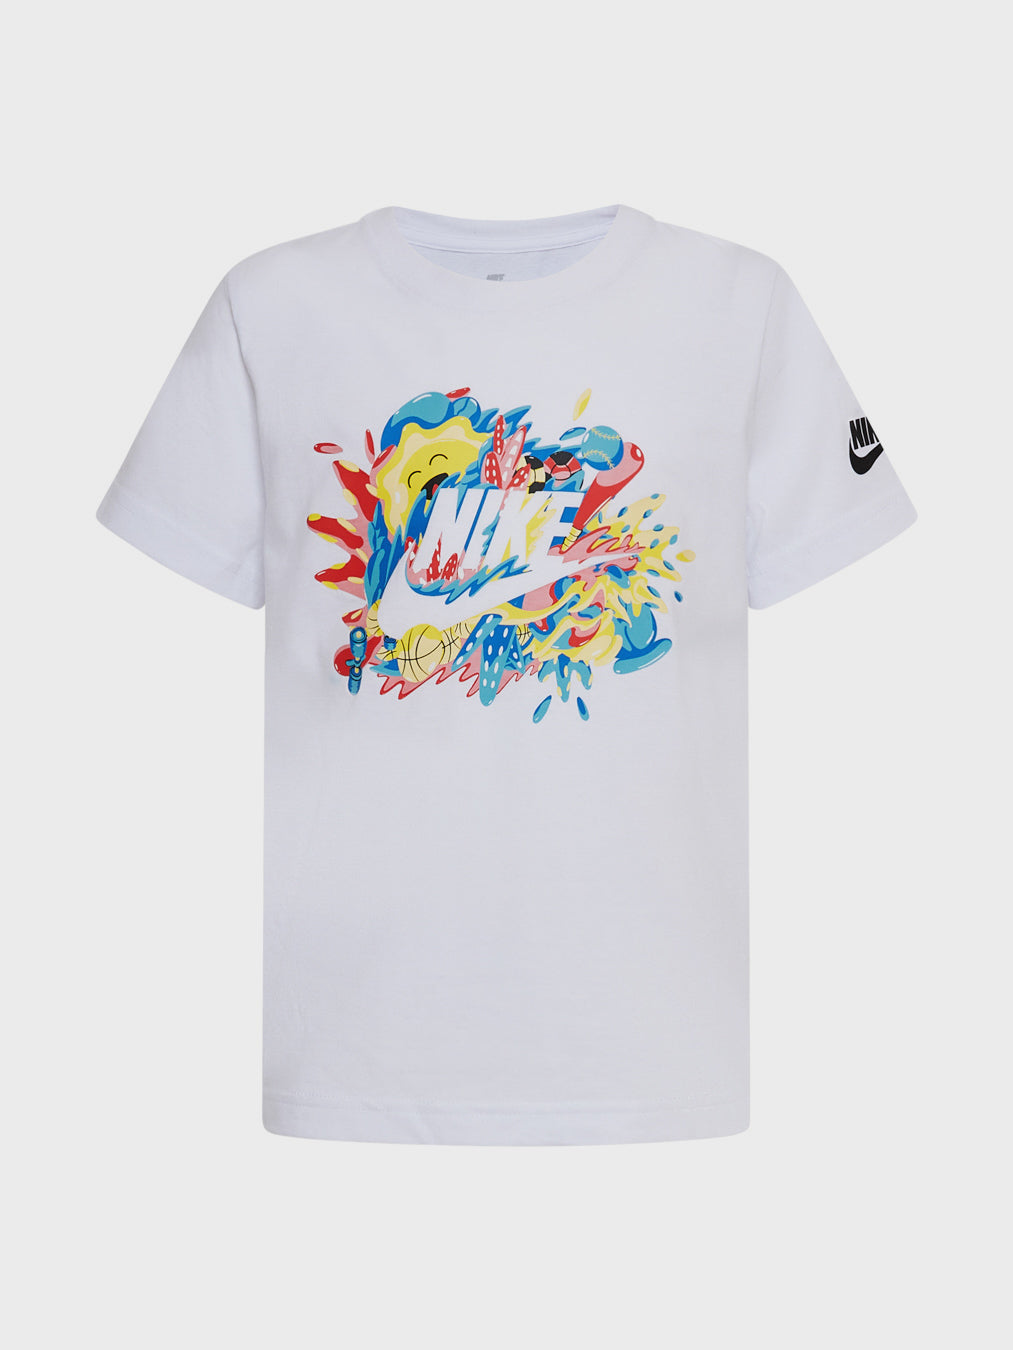 Nike Kids t shirt bianca con stampa frontale